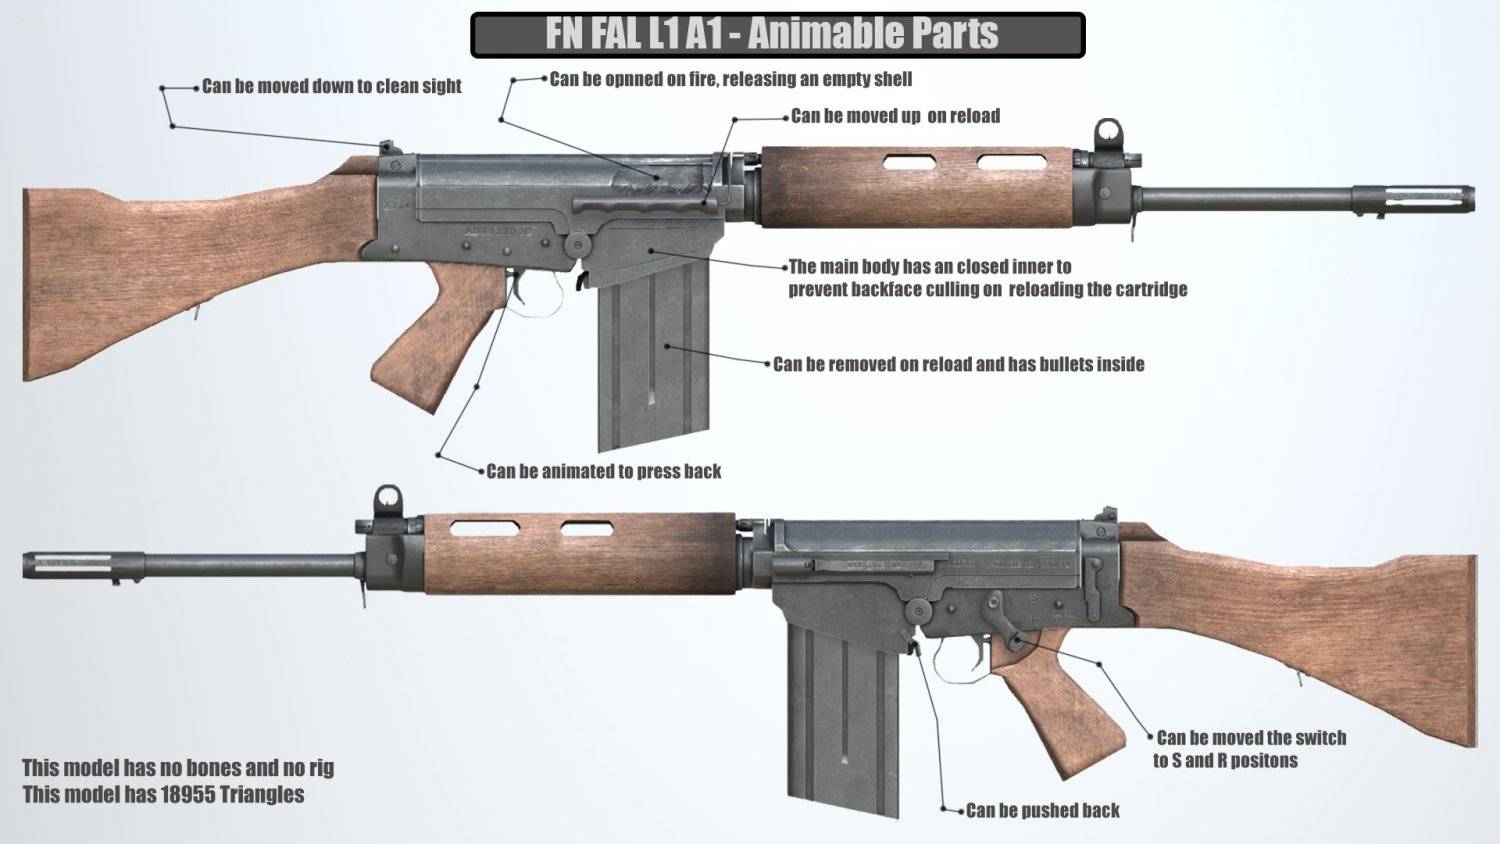 The IMBEL IA2 weapon system is an updated version of both the 5.56 MD-97 an...